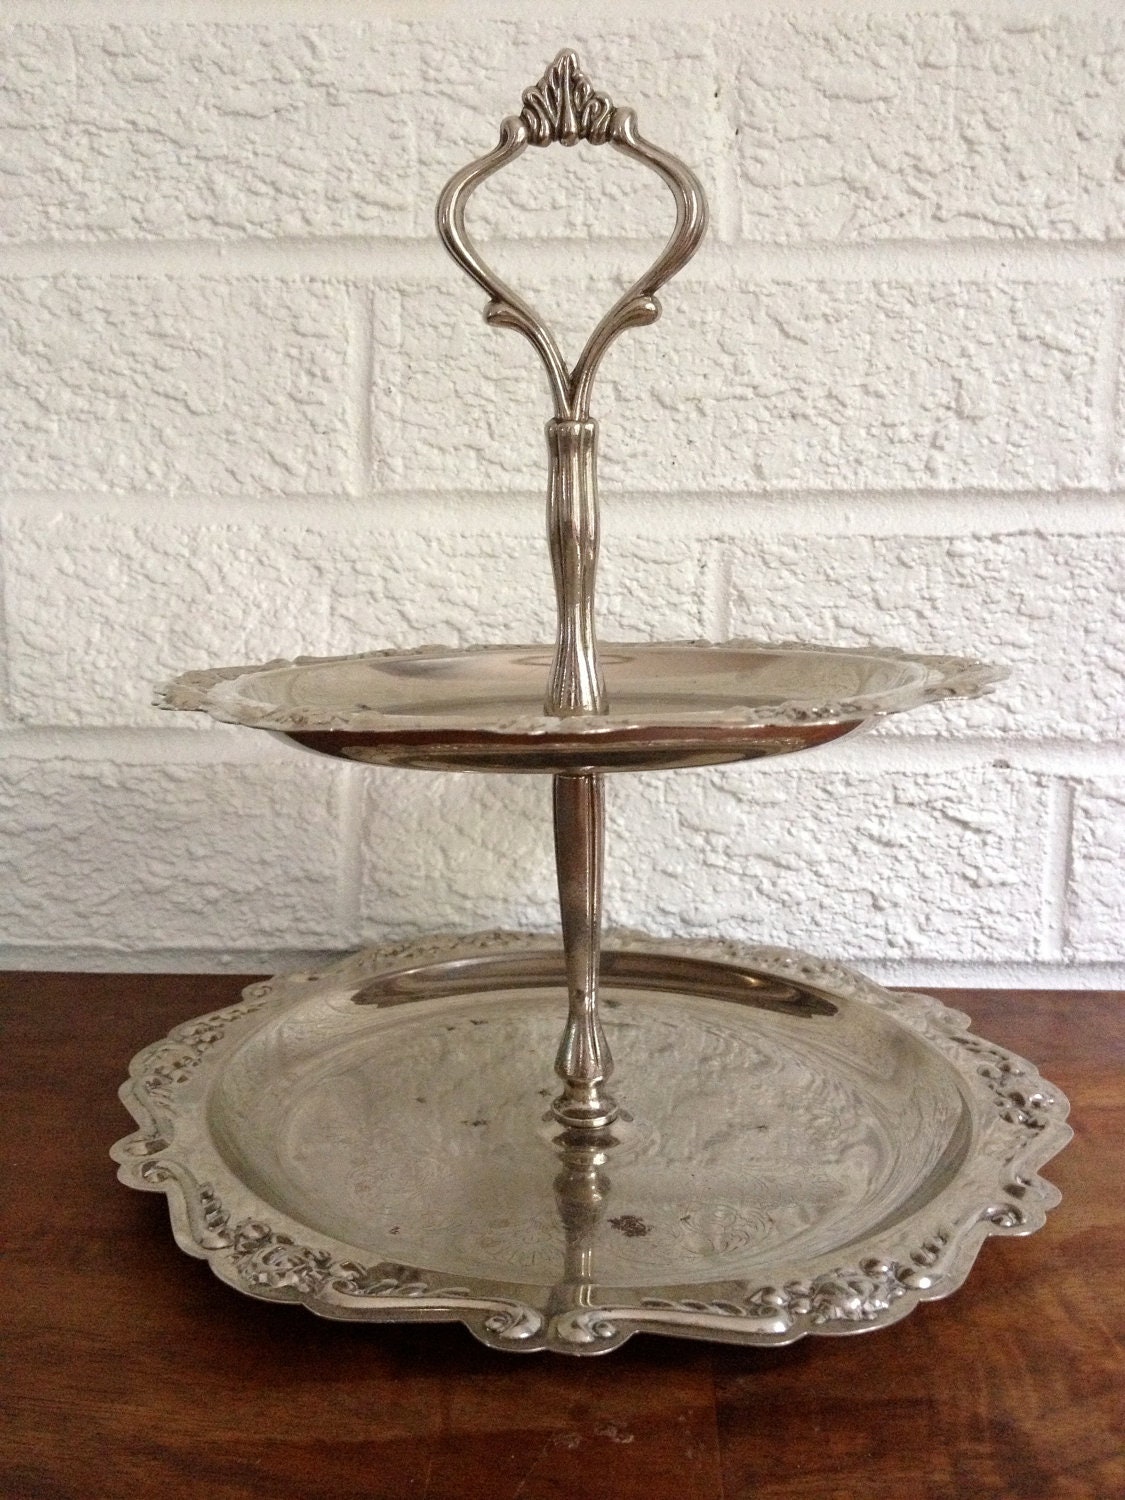 Vintage Two-Tiered Serving Platter - Silver Plated